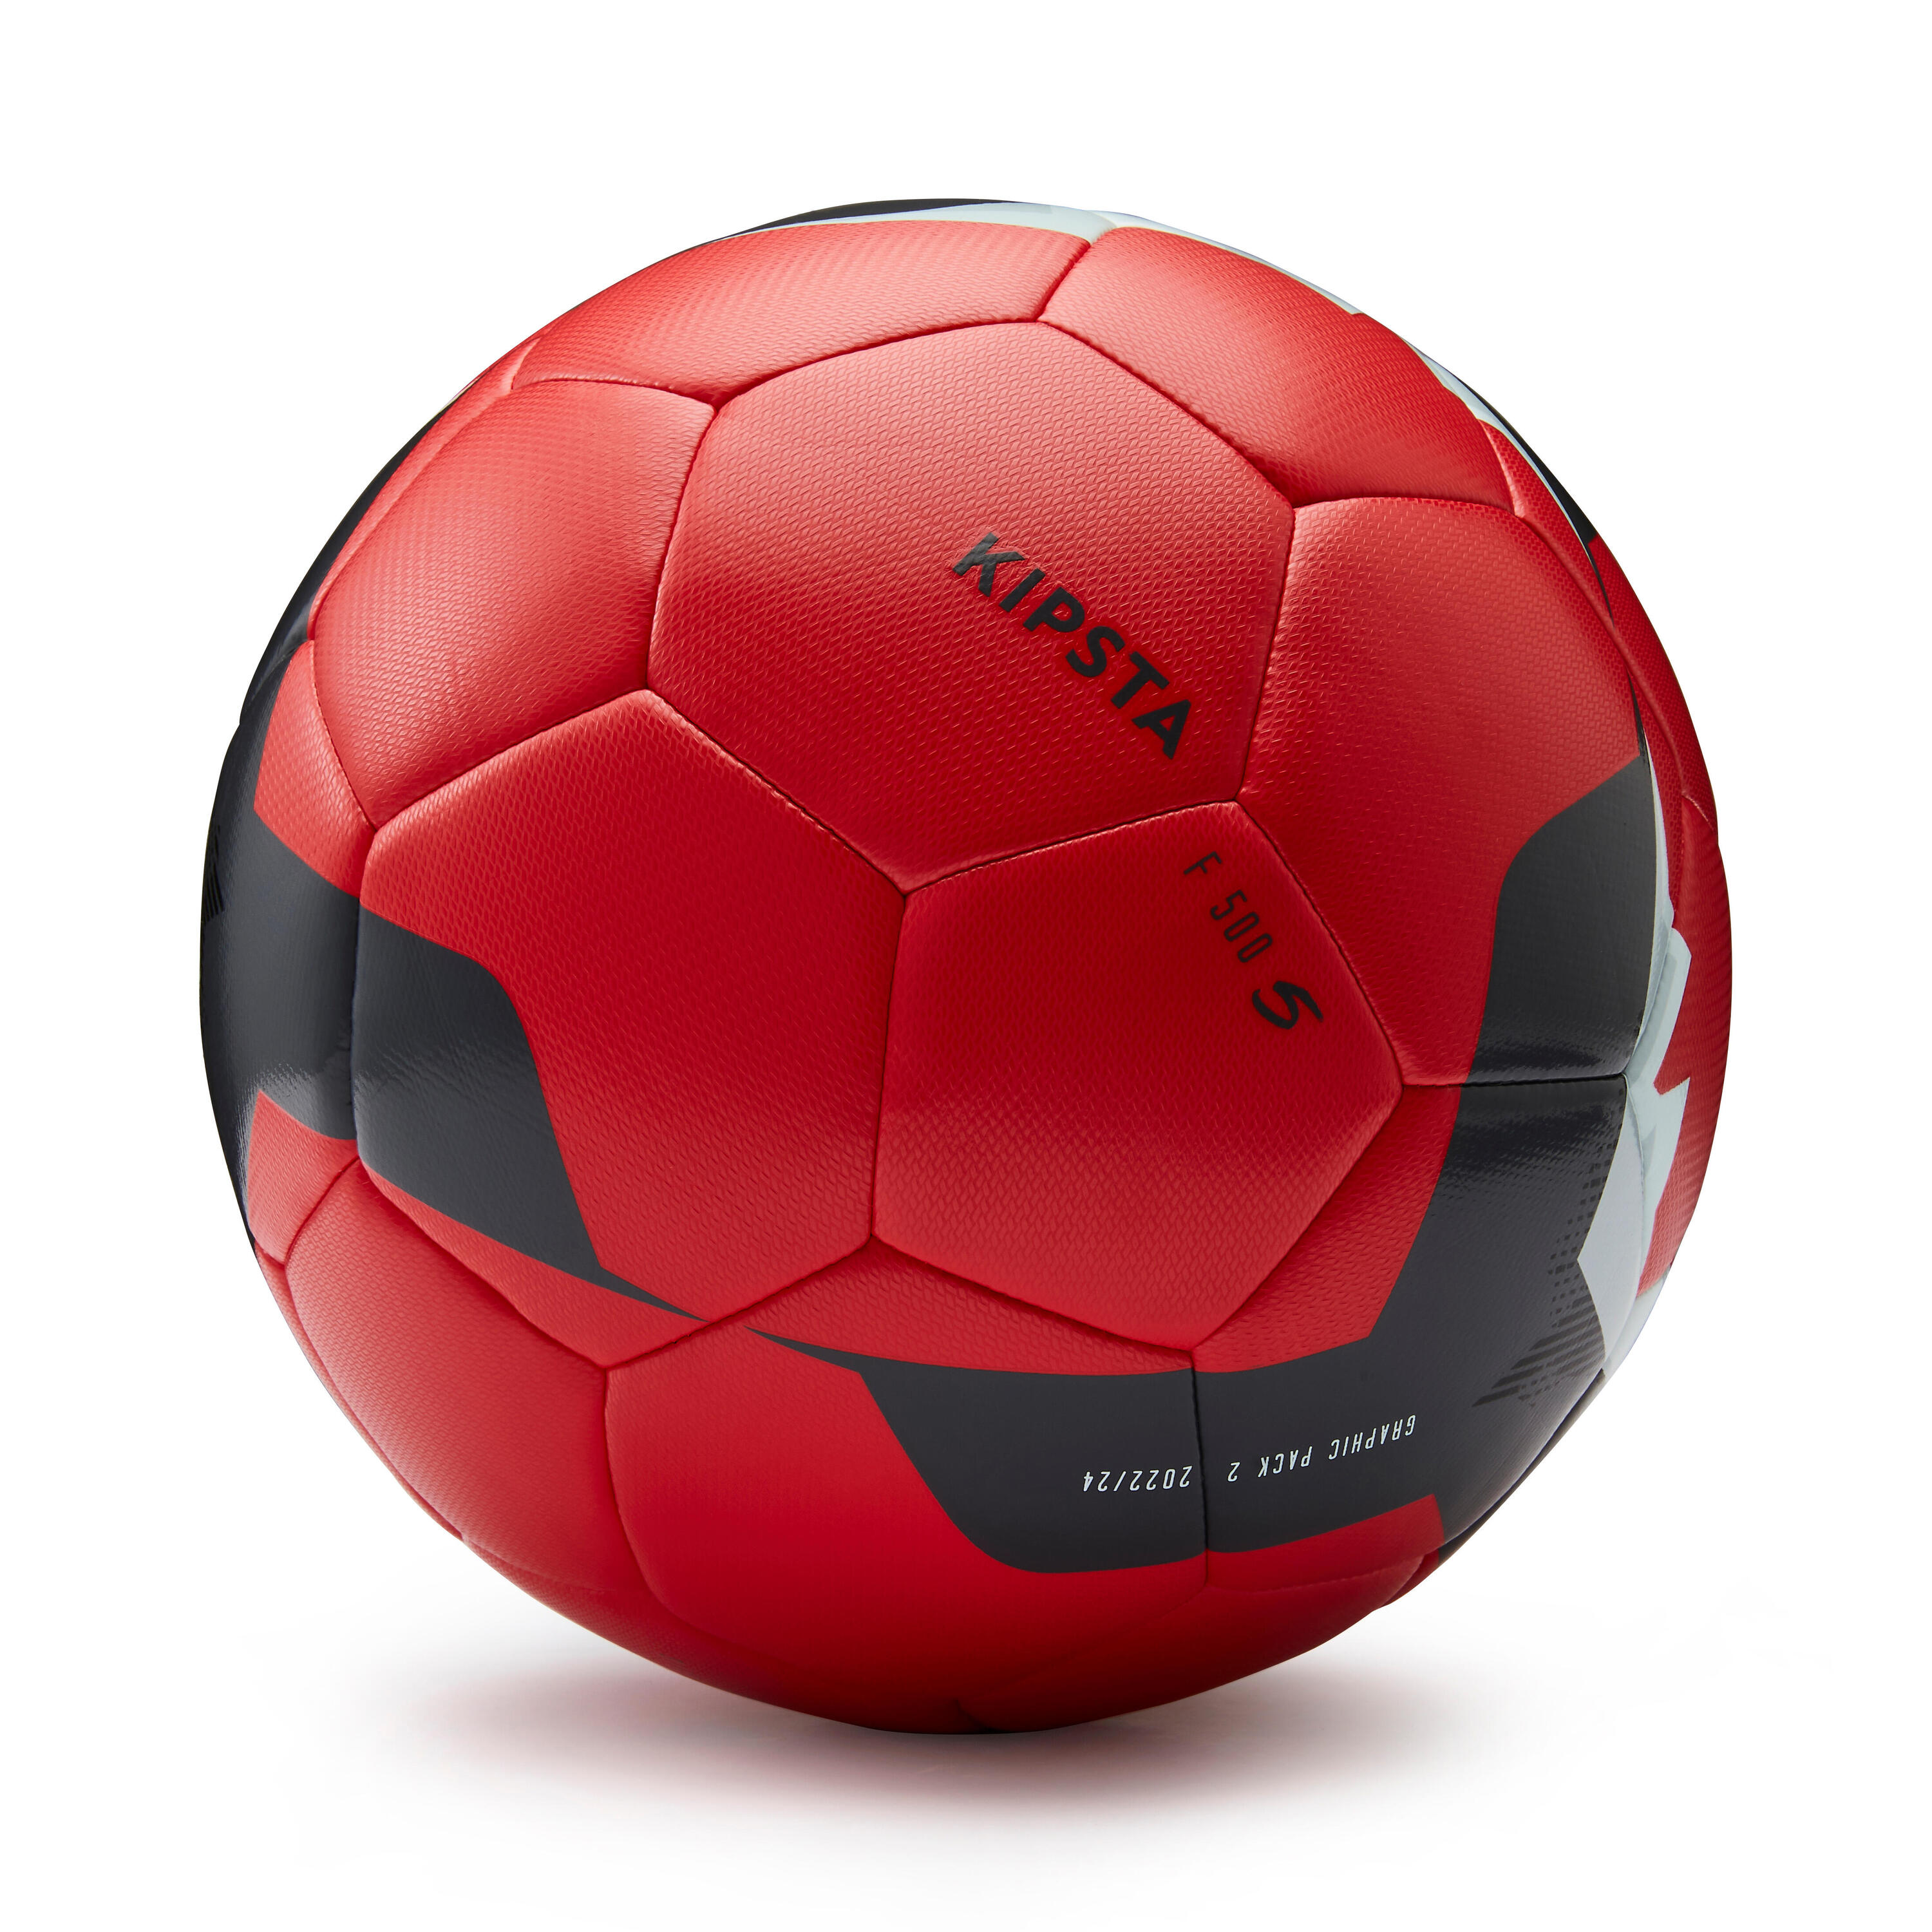 Adult size 5 fifa hybrid football, red 7/7